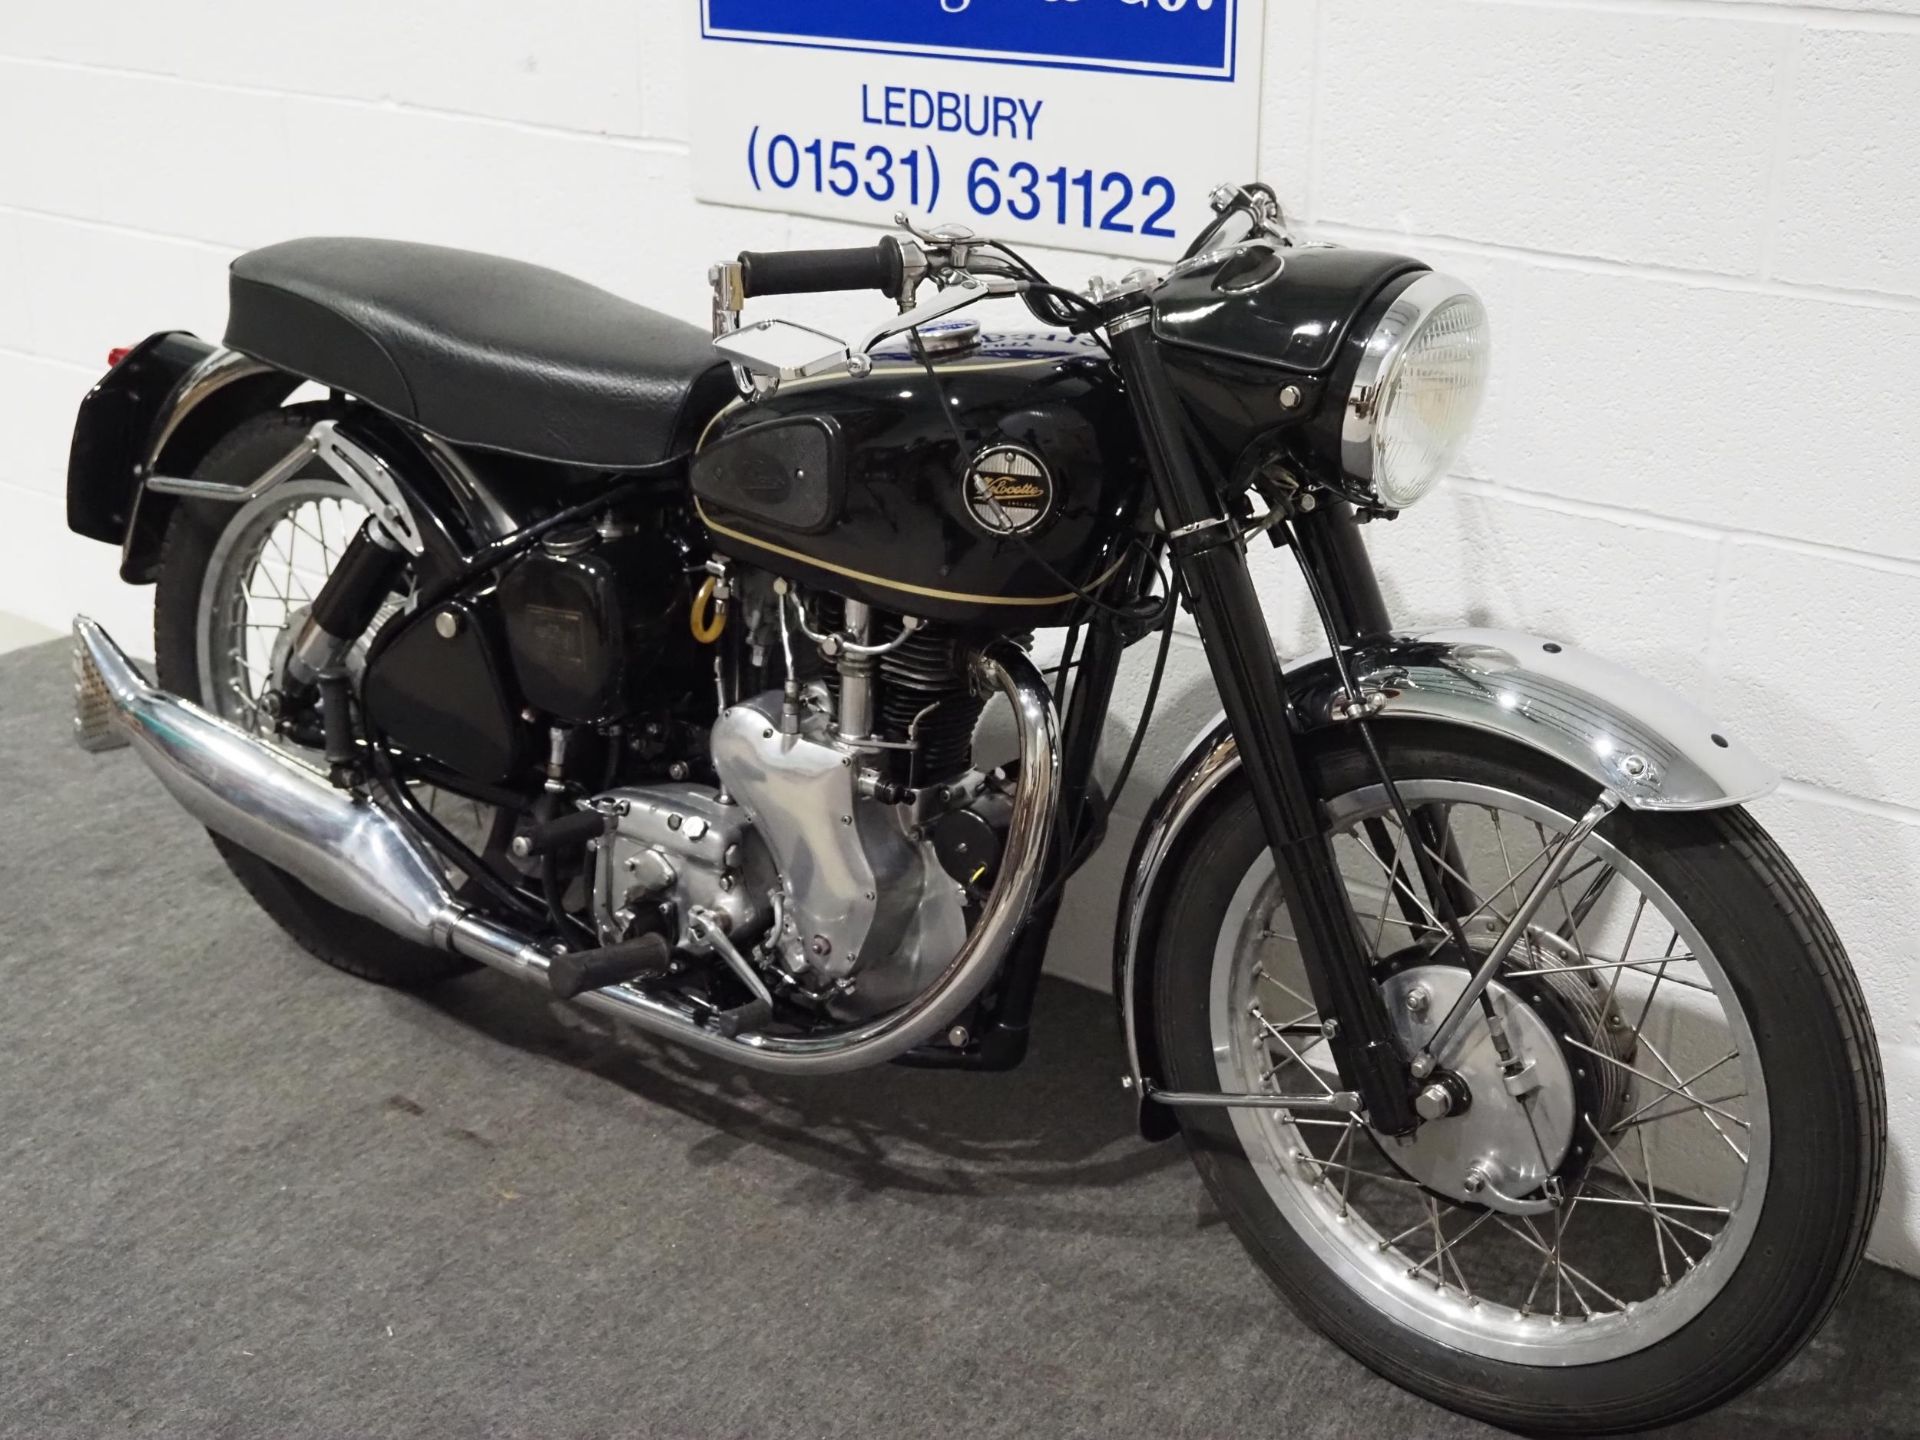 Velocette Viper motorcycle, 1960, 349cc Frame no. RS14336 Engine no. VR2792 Runs and rides well,